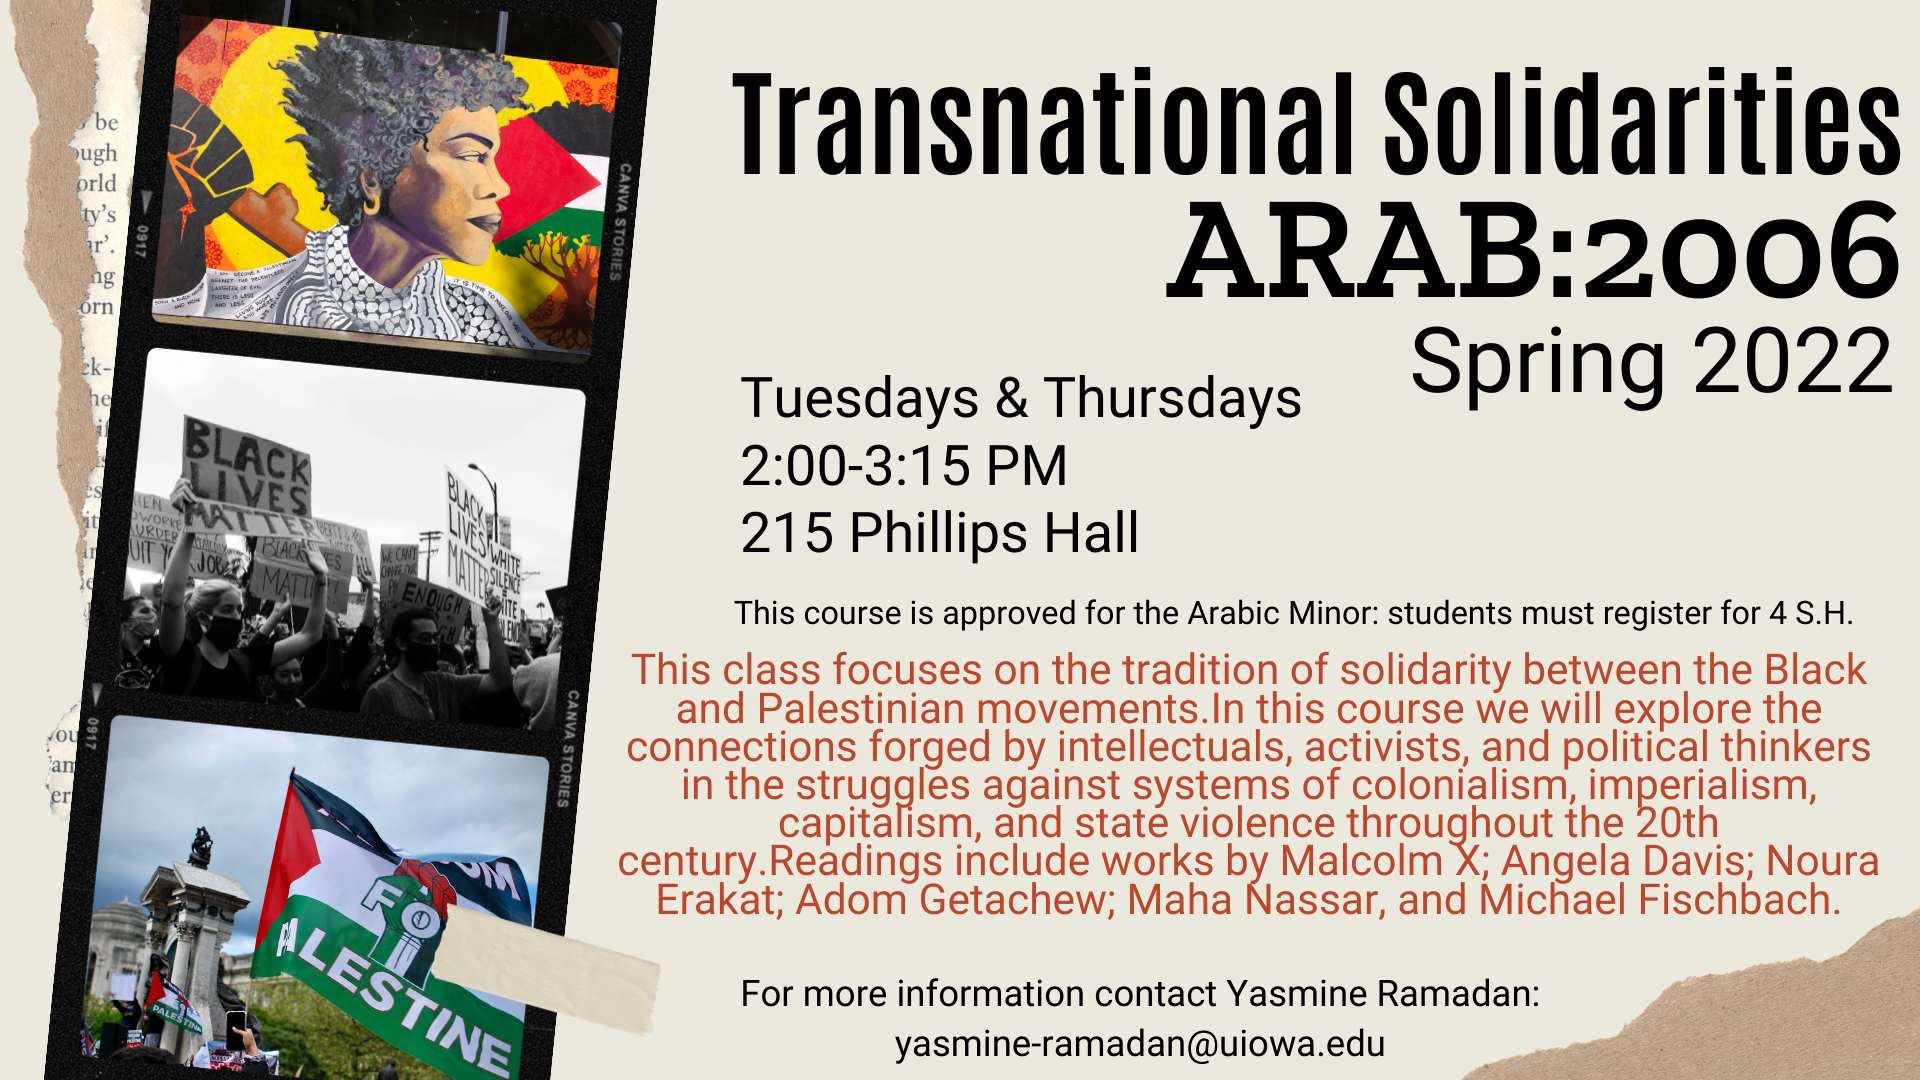 Transnational Solidarities ARAB 2006 coming this Spring 2022. Happening Tuesdays and Thursdays from 2:00-3:15 PM in 215 Phillips Hall. This course is approved for the Arabic Minor: students must register for 4 S.H. This class focuses on the tradition of solidarity between the Black and Palestinian movements.In this course we will explore the connections forged by intellectuals, activists, and political thinkers in the struggles against systems of colonialism, imperialism, capitalism, and state violence throughout the 20th century.Readings include works by Malcolm X; Angela Davis; Noura Erakat; Adom Getachew; Maha Nassar, and Michael Fischbach. For more information contact Yasmine Ramadan: yasmine-ramadan@uiowa.edu